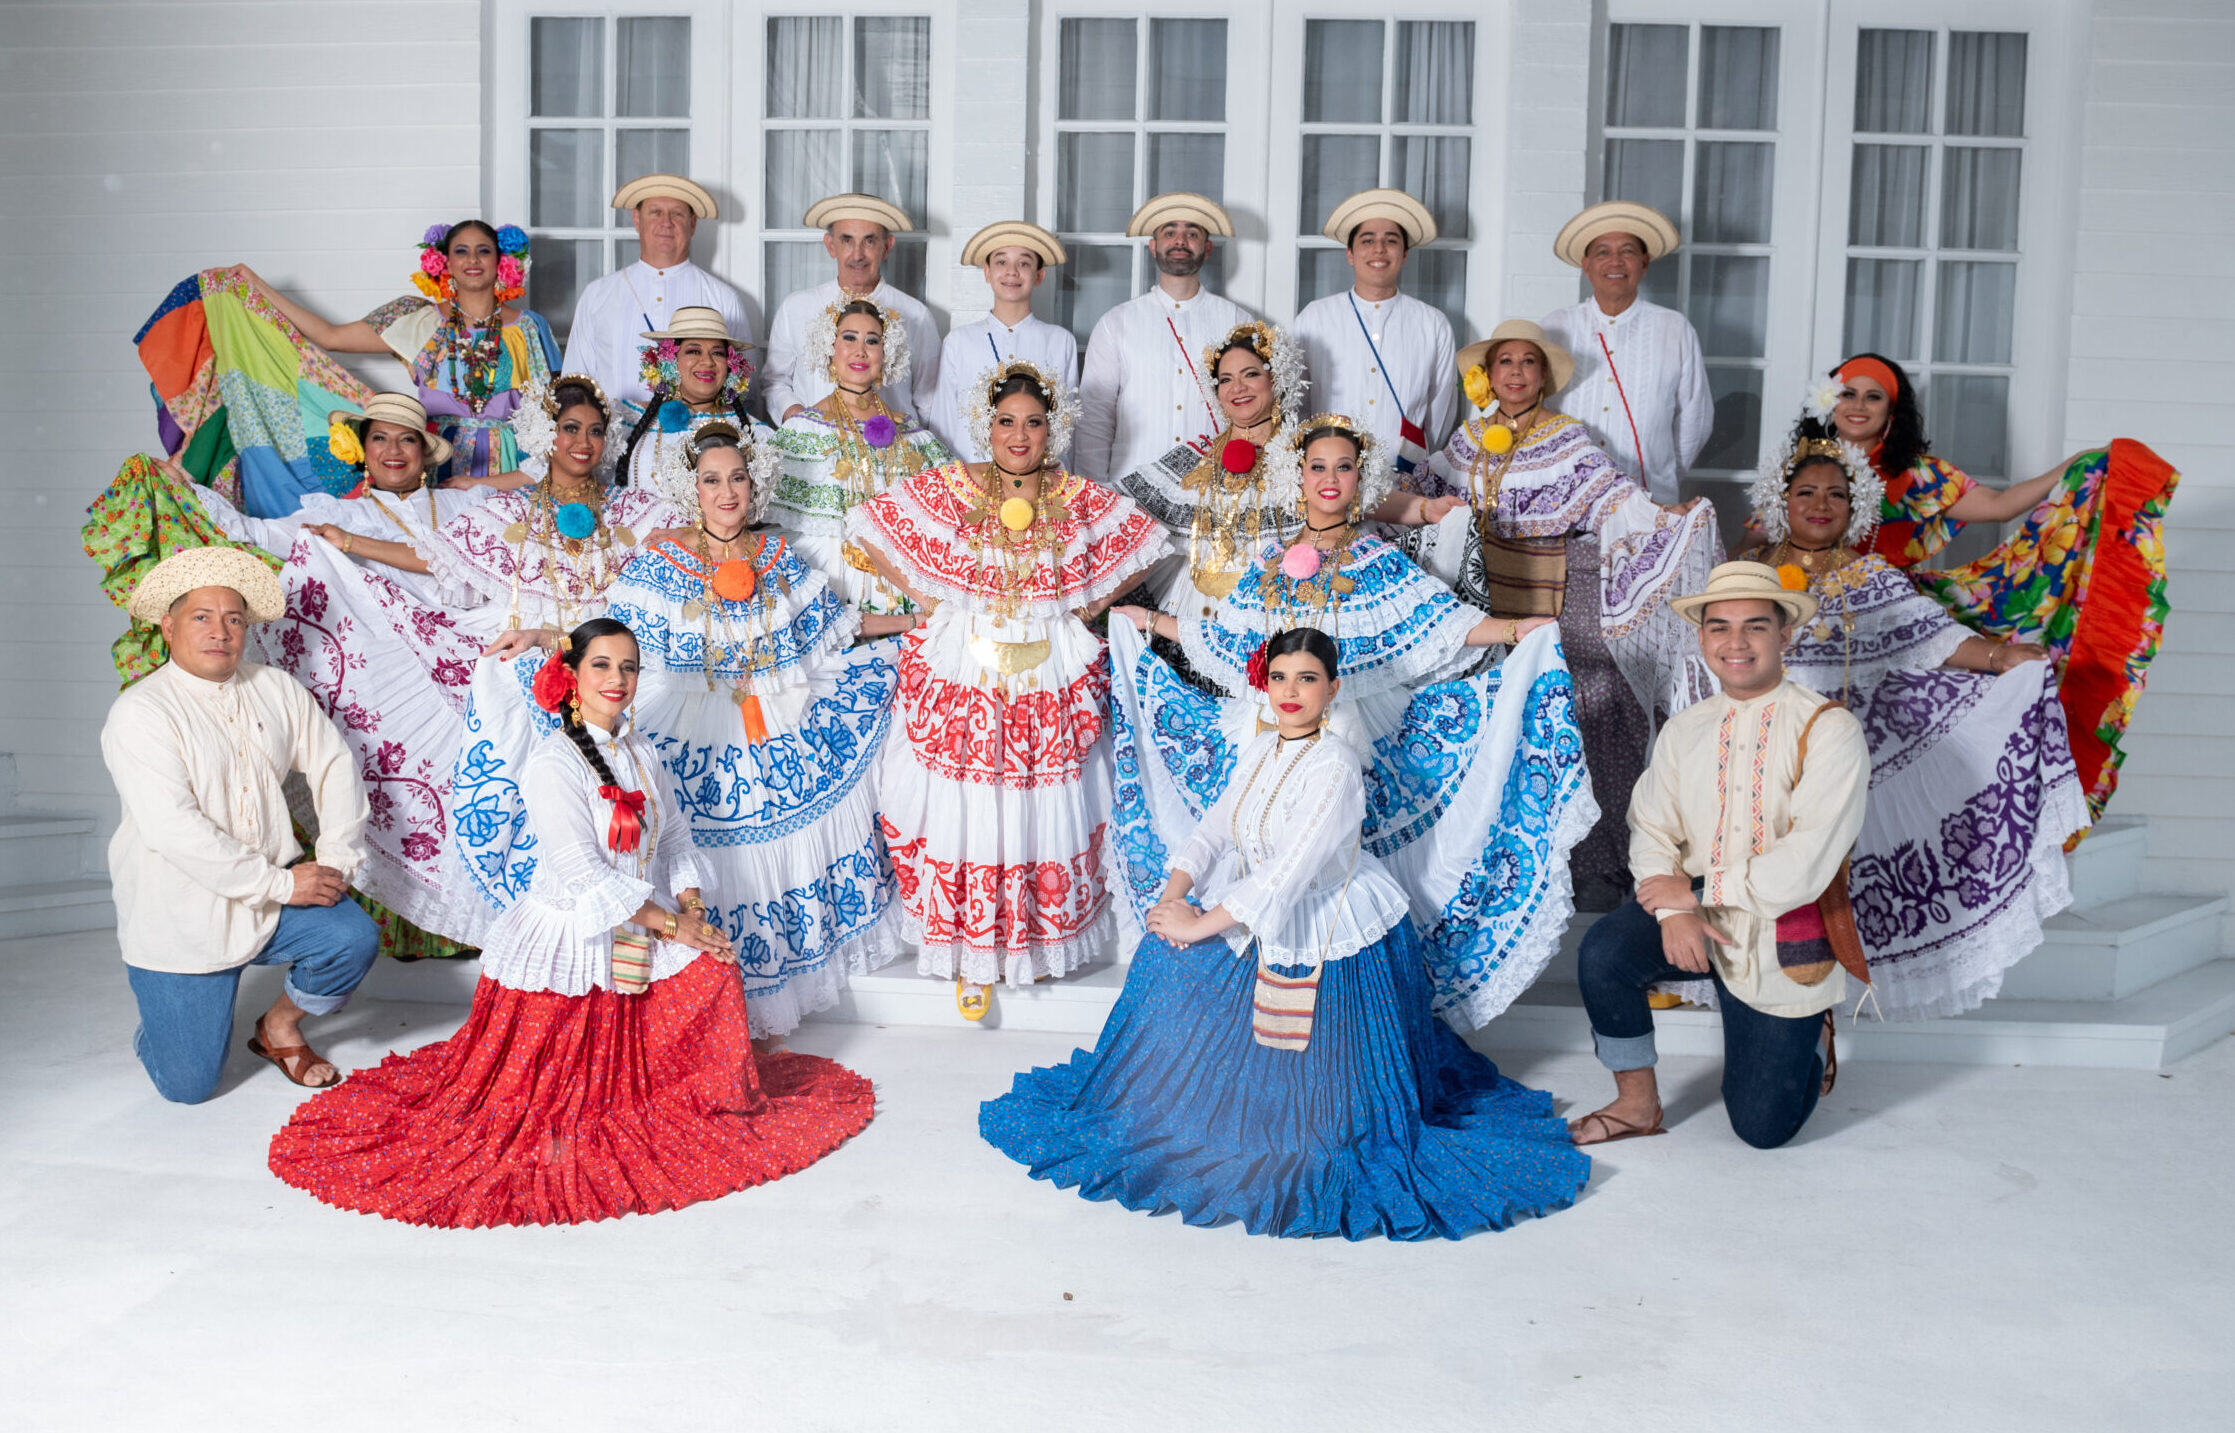 The full dance ensemble poses for a photo in various traditional costumes. There are 22 members and the group is comprised of both men and women.